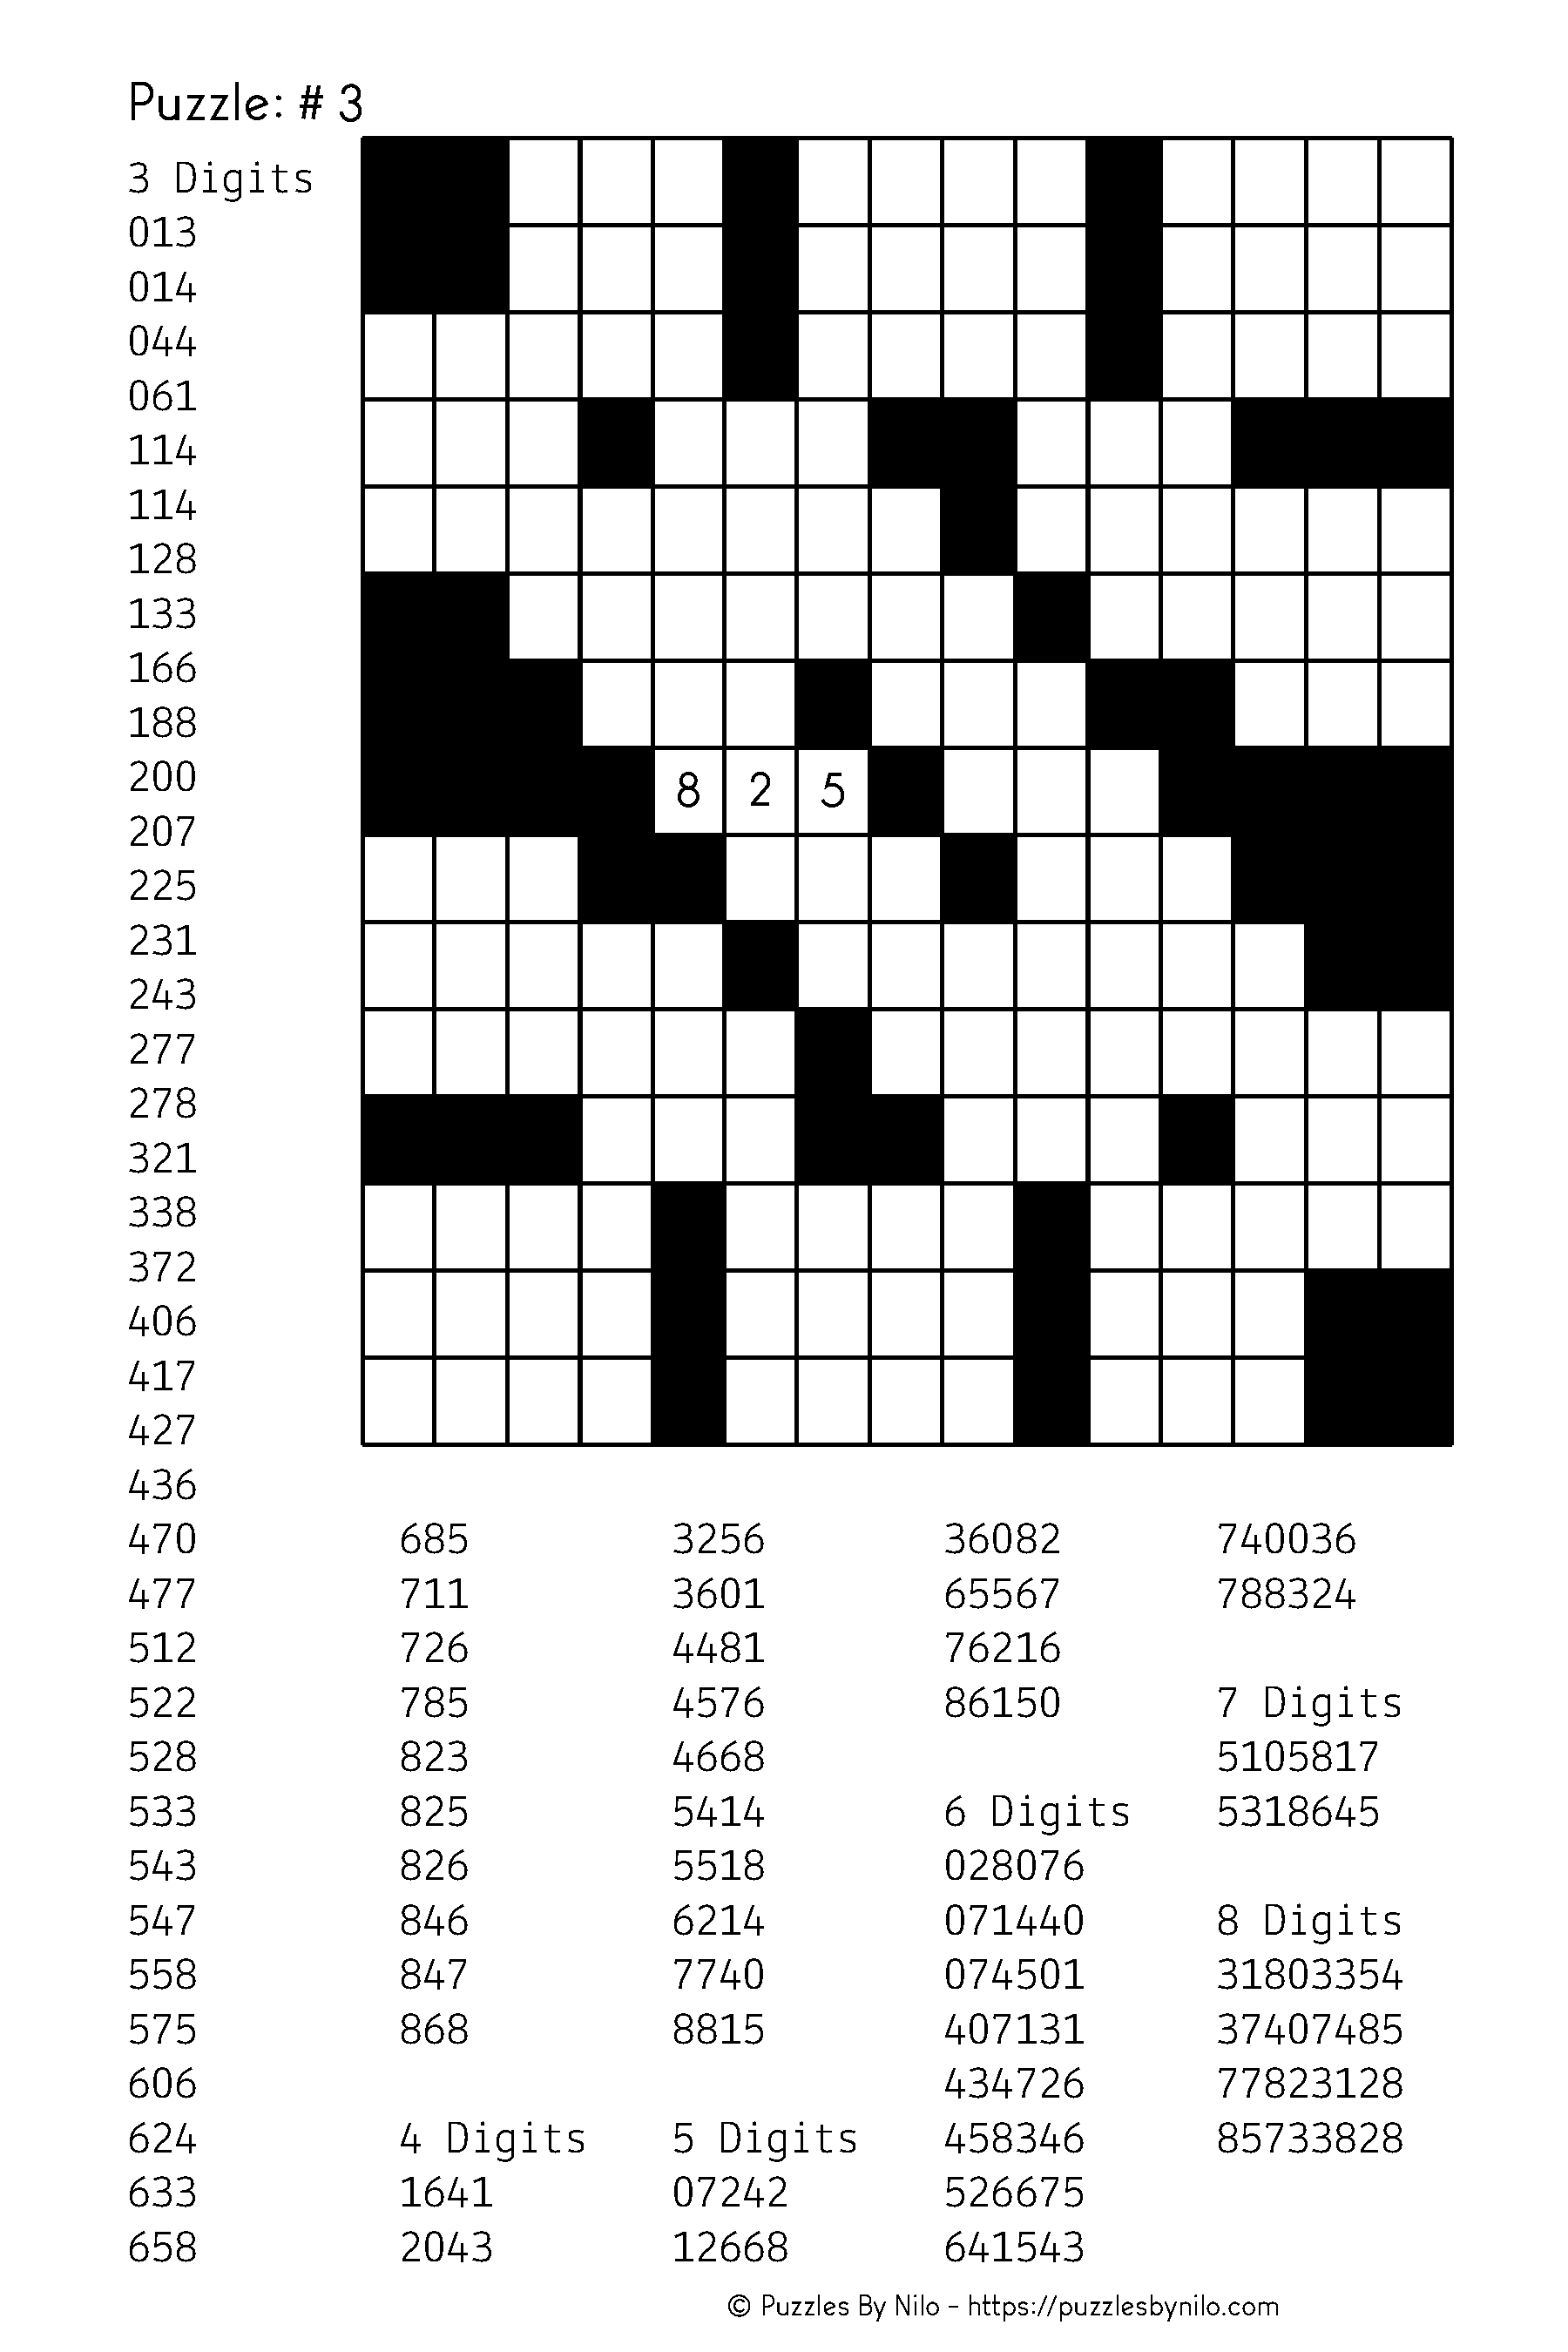 Get Your Free Puzzle Here! - Https://goo.gl/hxpjtw | Math Ideas - Free Printable Crossword Puzzle #6